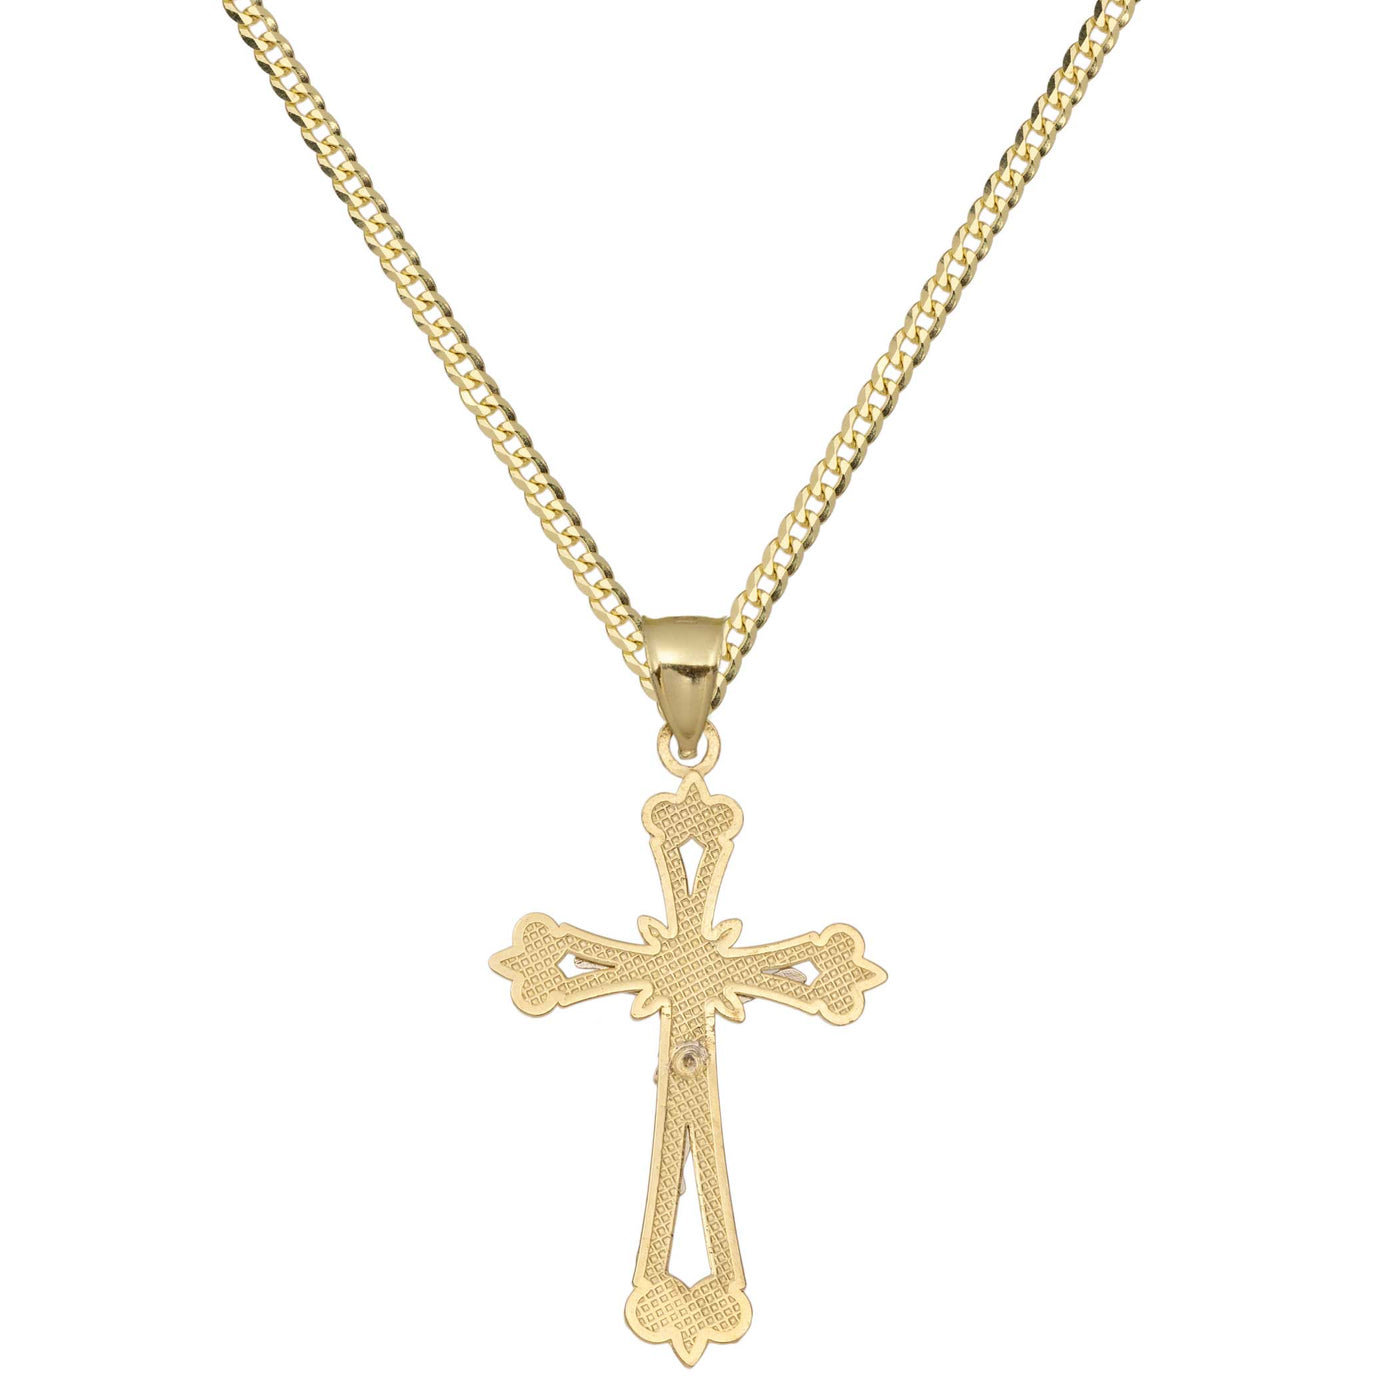 1 1/2" Cut-Out Crucifix Jesus Cross Necklace 10K Yellow White Gold